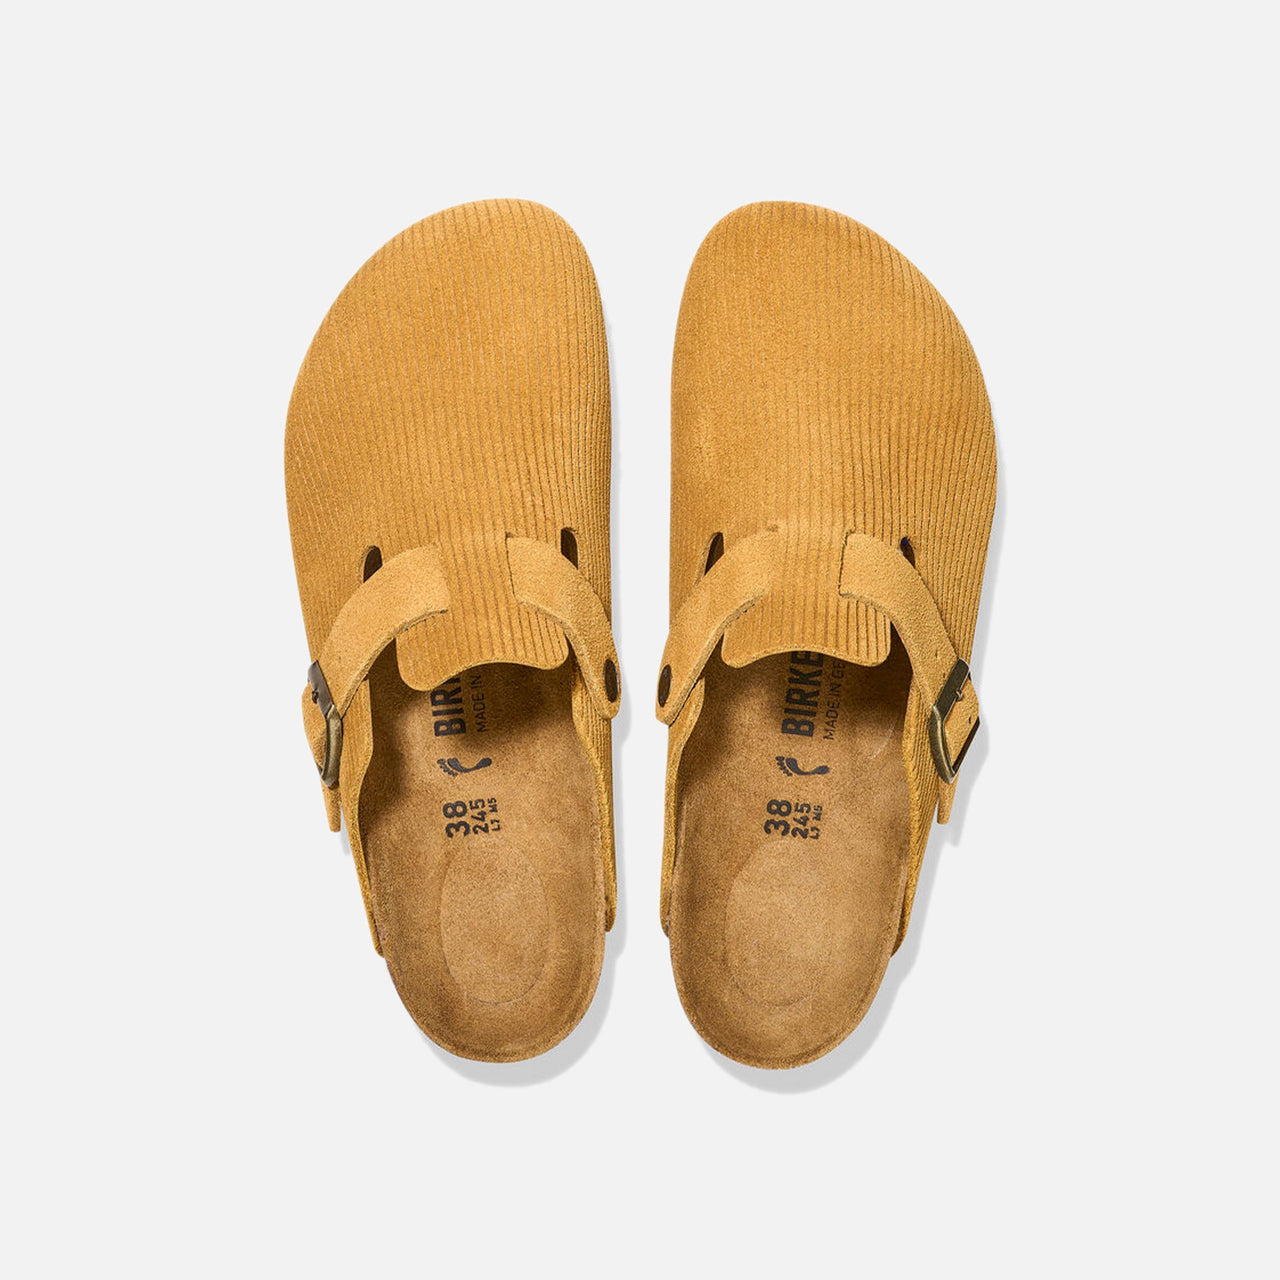 Classic Birkenstock Boston clogs with a cozy brown corduroy upper